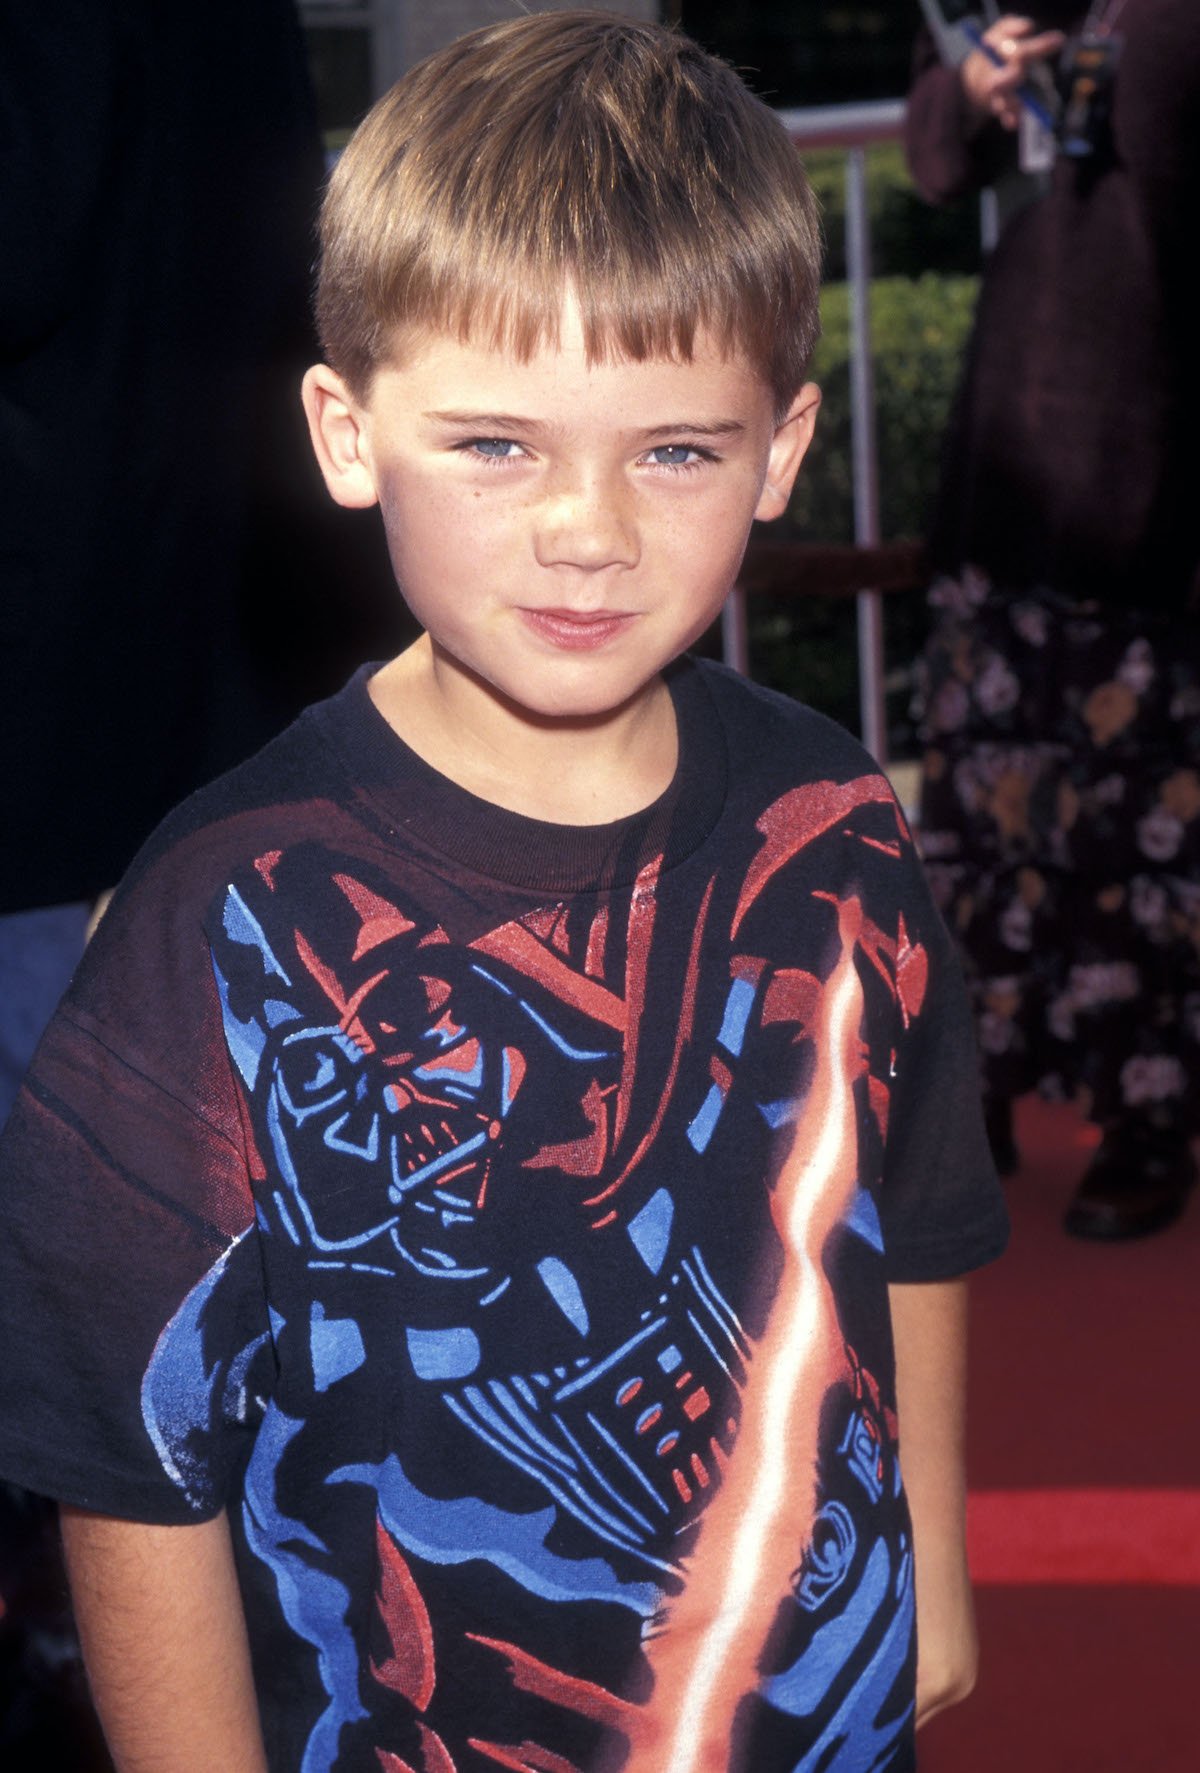 Jake Lloyd at an event